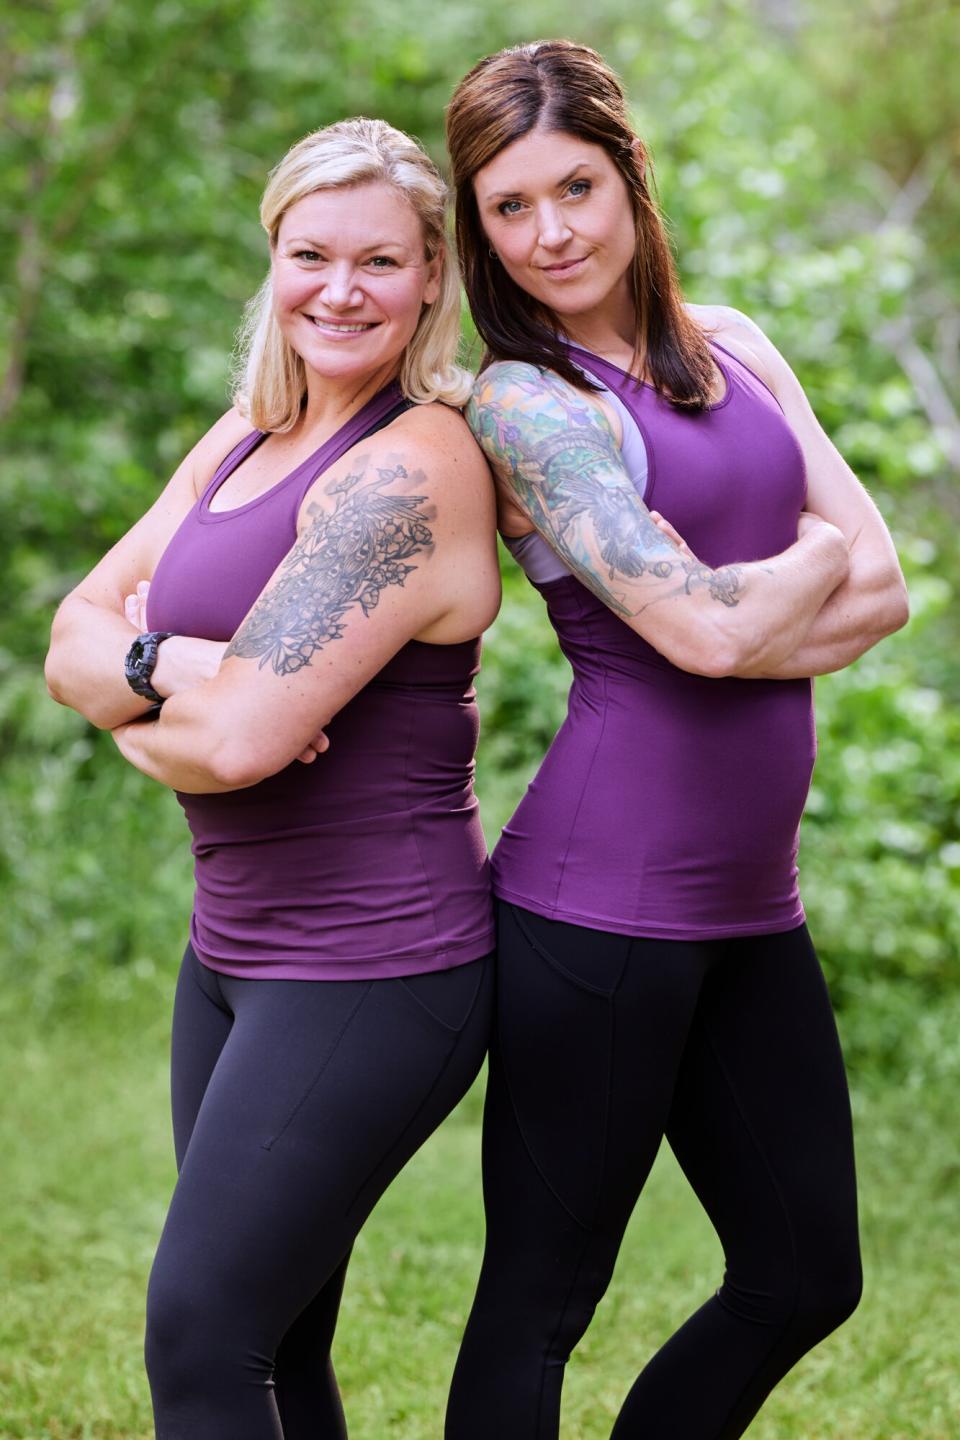 Robbin Tomich and Chelsea Day in 'The Amazing Race' season 35